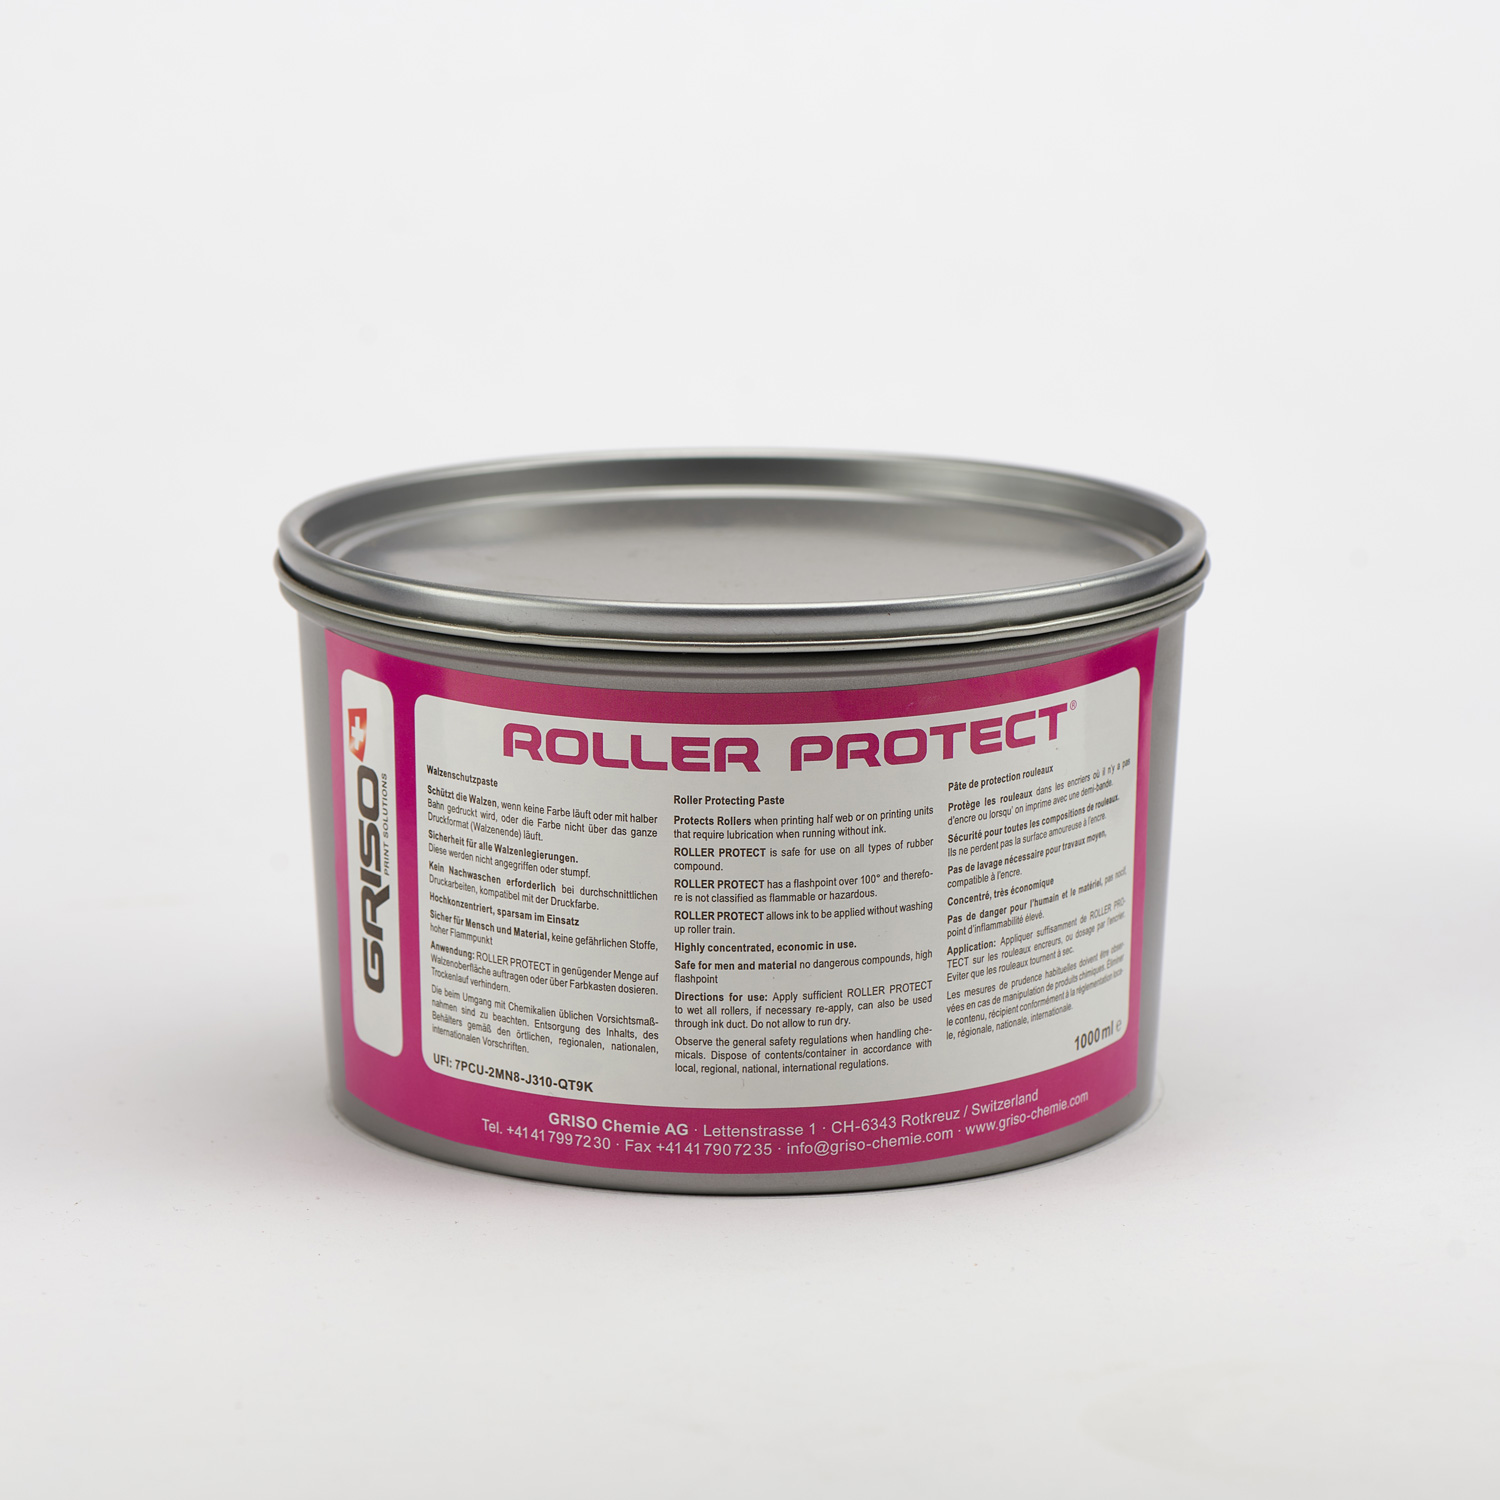 ROLLER PROTECT